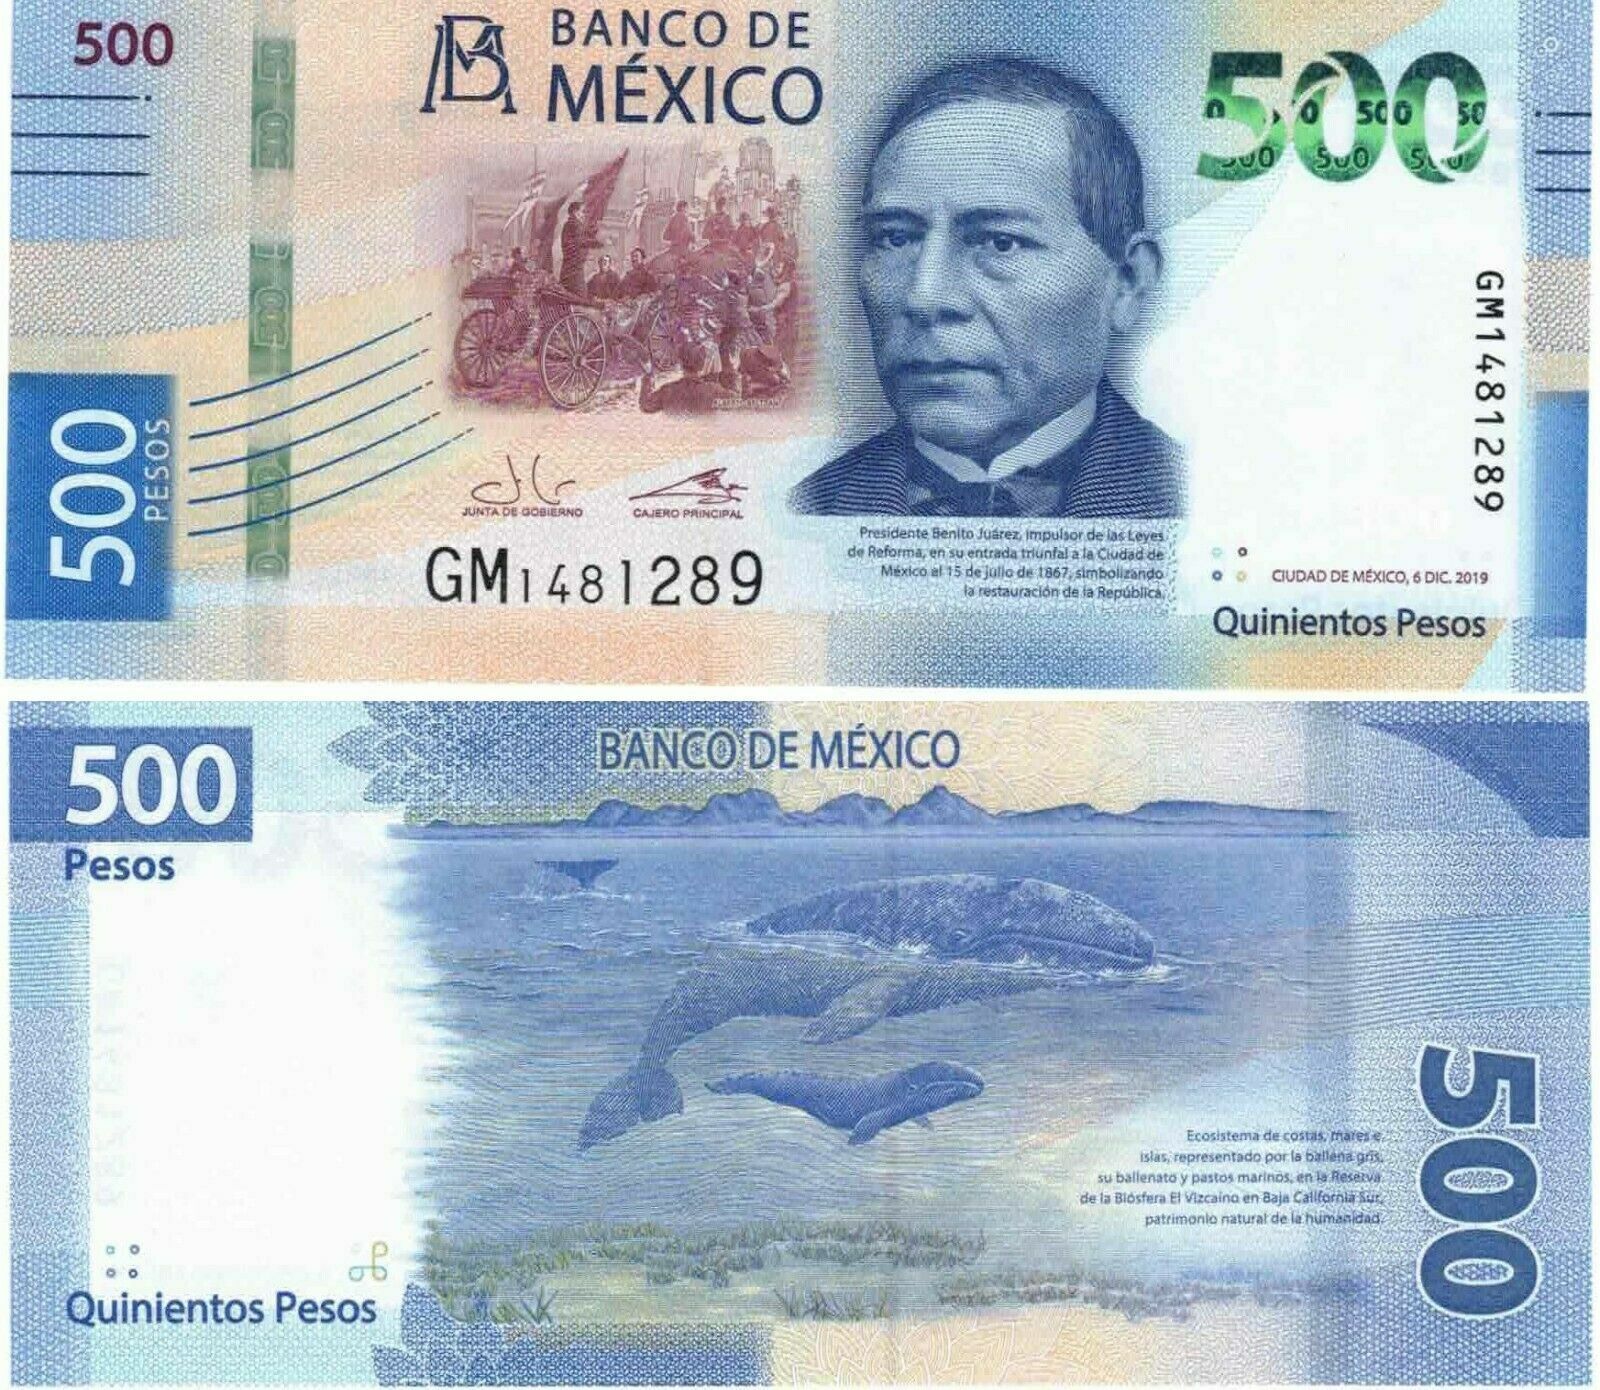 500 PESOS MEXICO BILL 2019 - SHIPPING FREE Year-end annual account UNCIRCULATED Large special price